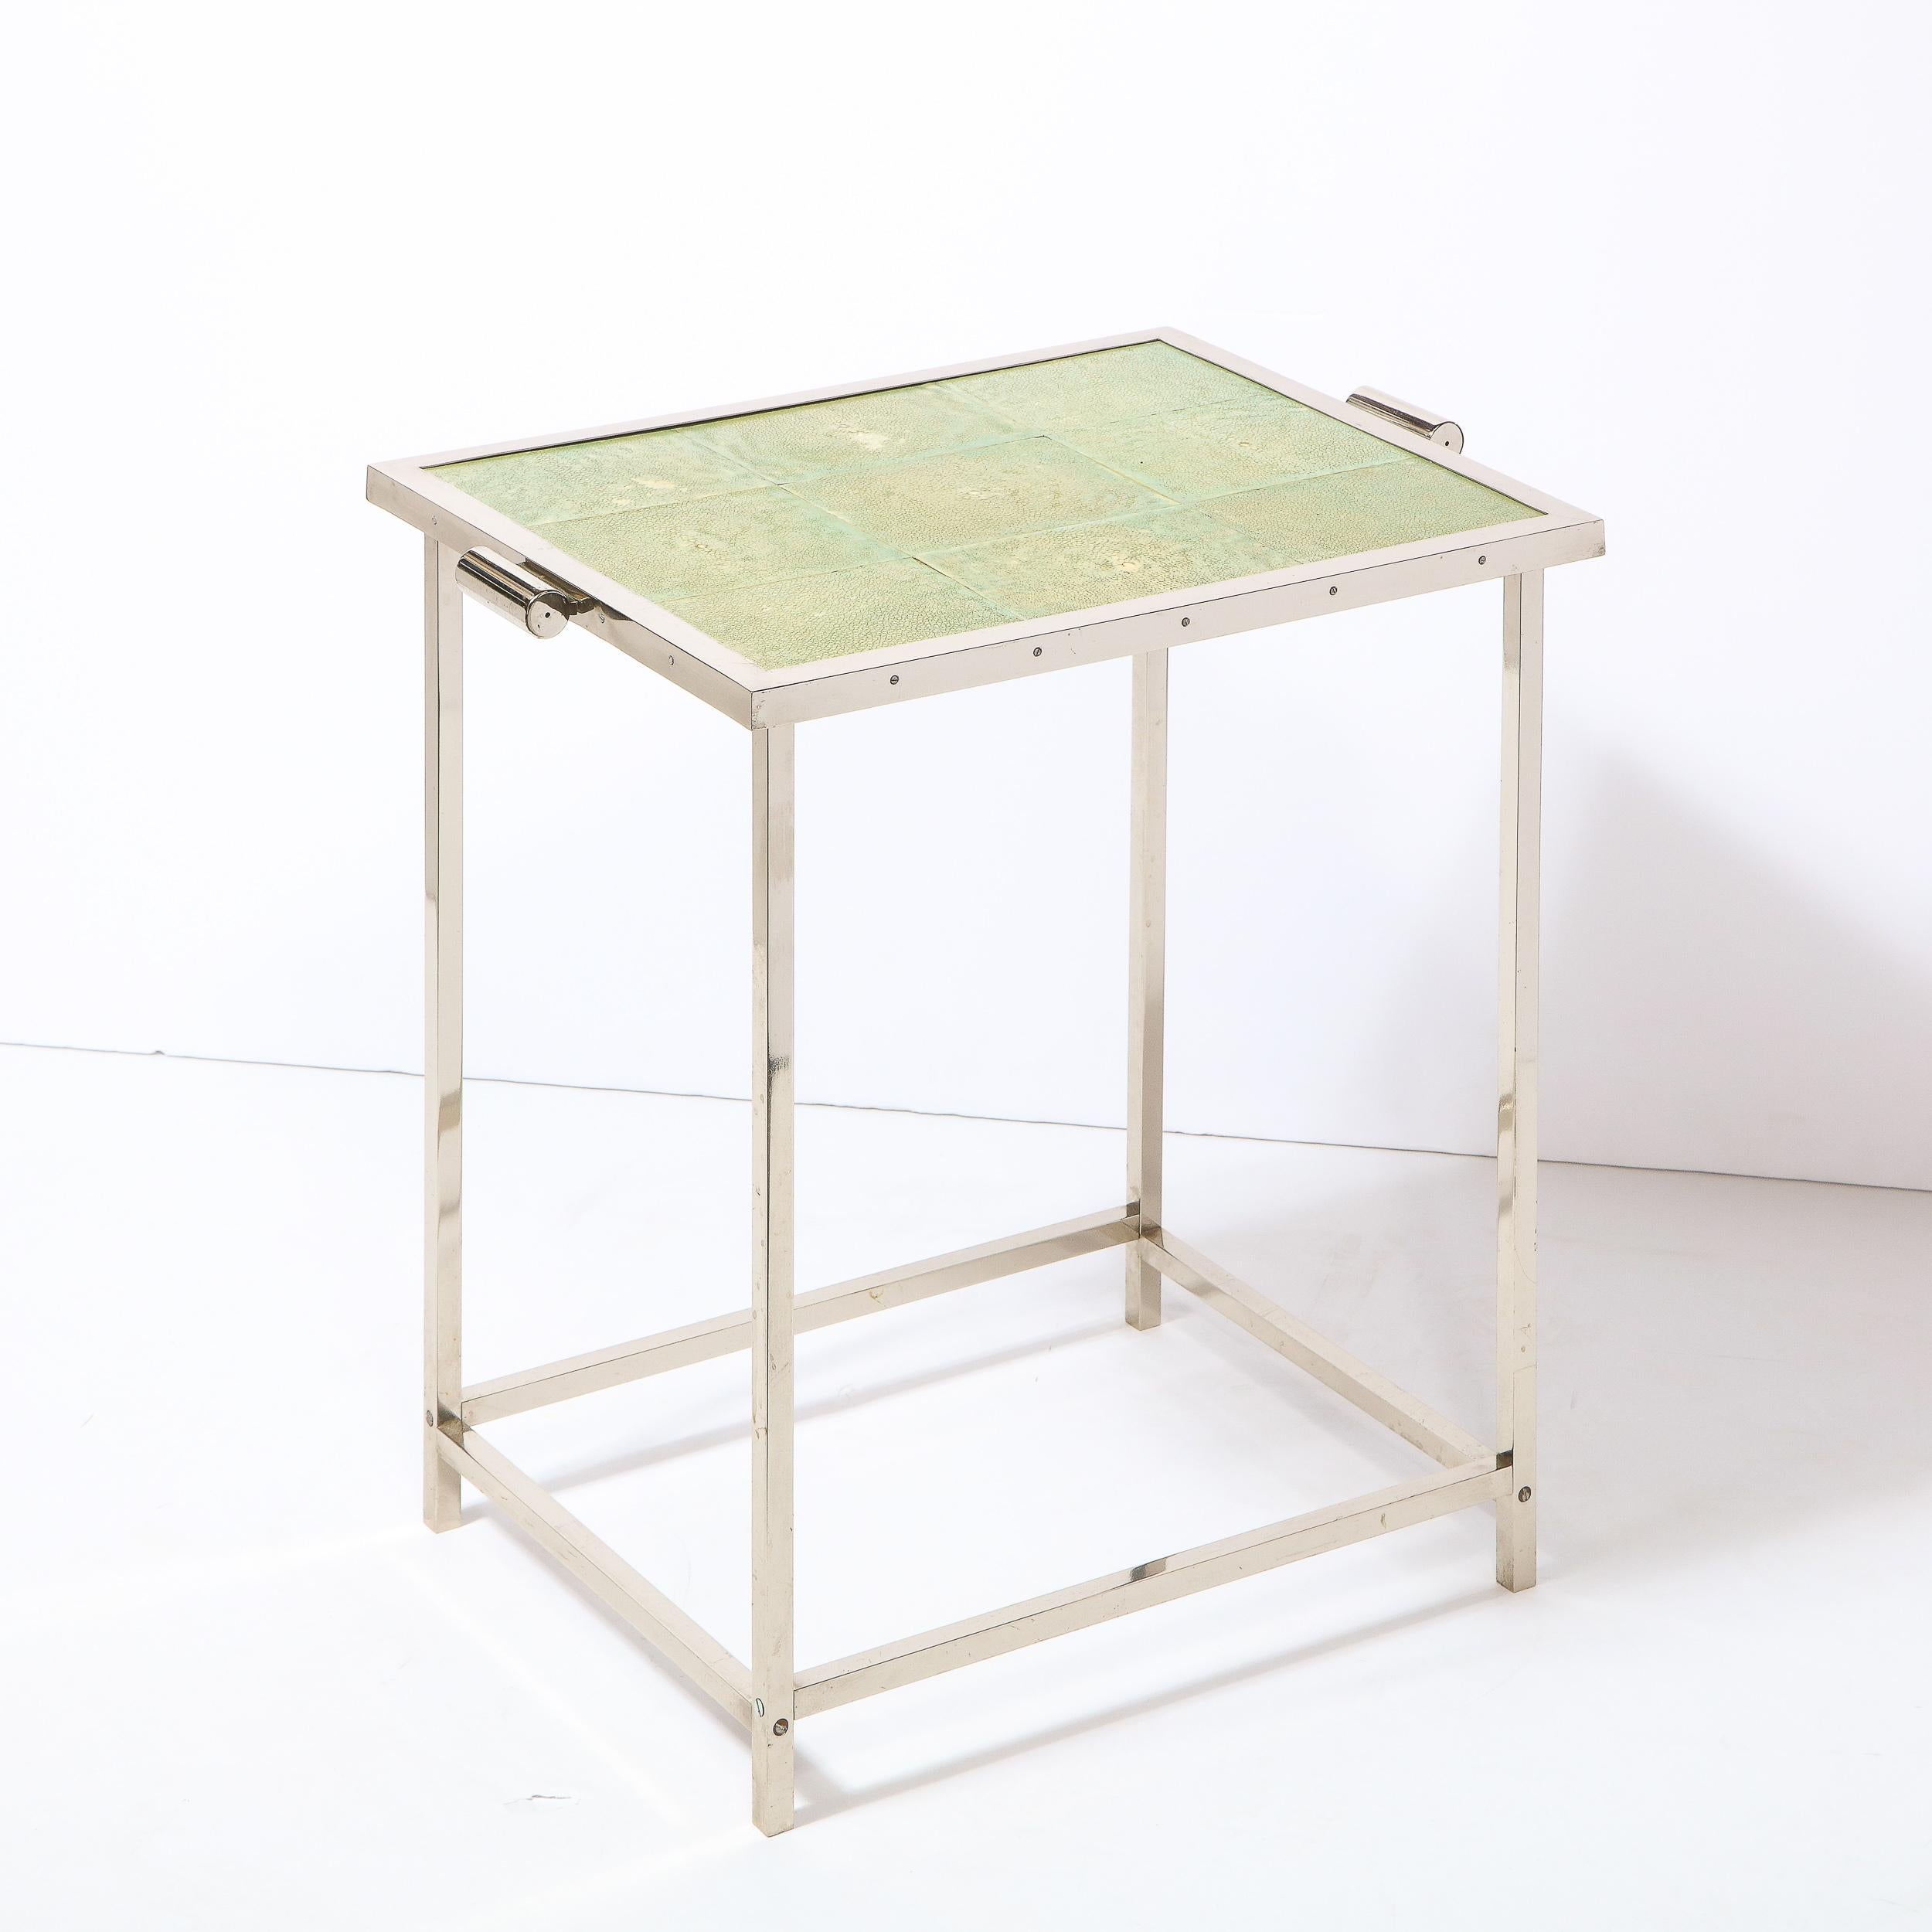 Late 20th Century Art Deco Revival Modernist Polished Aluminum Side Table with Shagreen Top